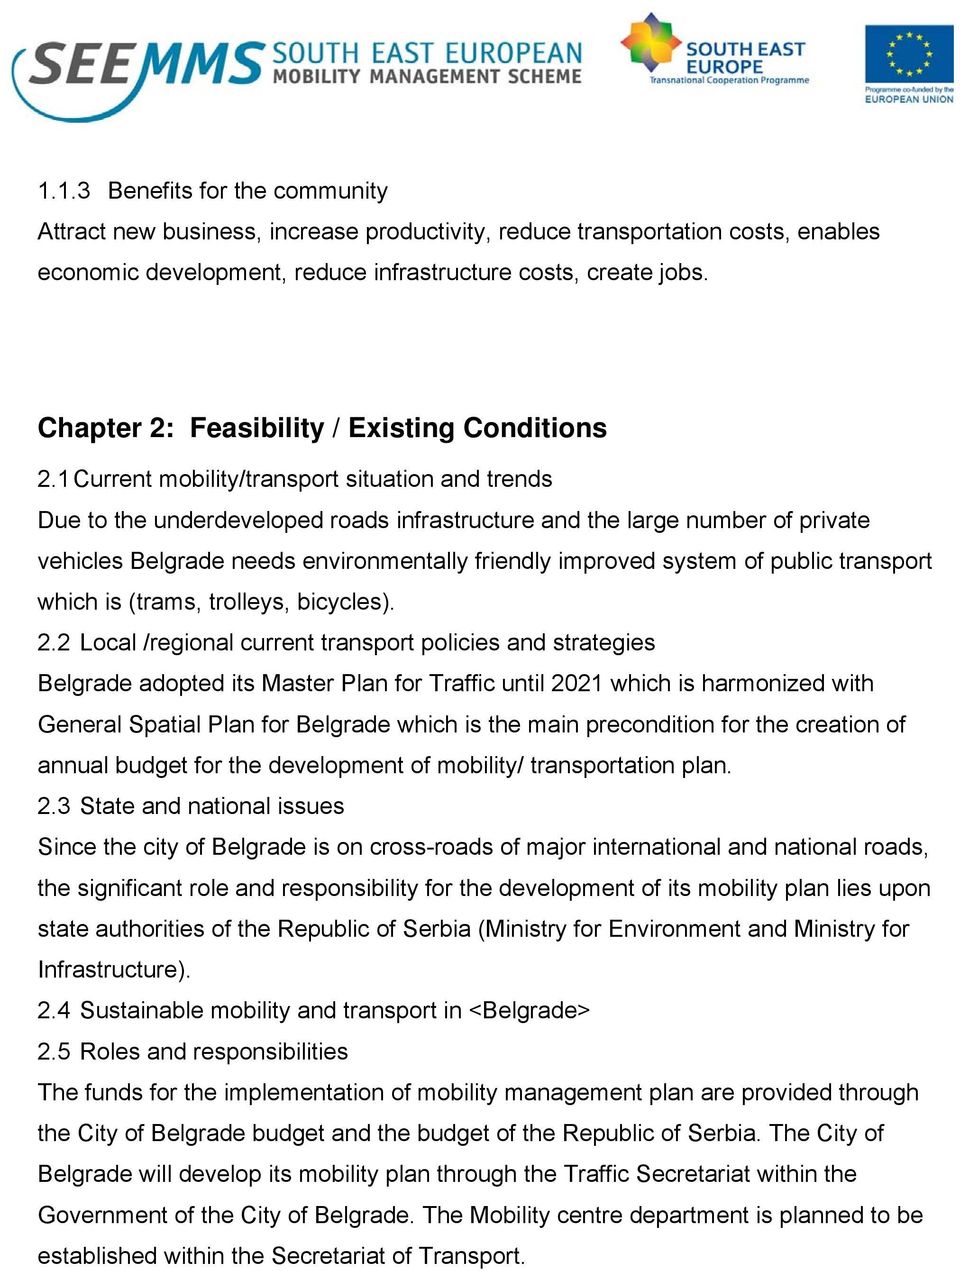 1 Current mobility/transport situation and trends Due to the underdeveloped roads infrastructure and the large number of private vehicles Belgrade needs environmentally friendly improved system of